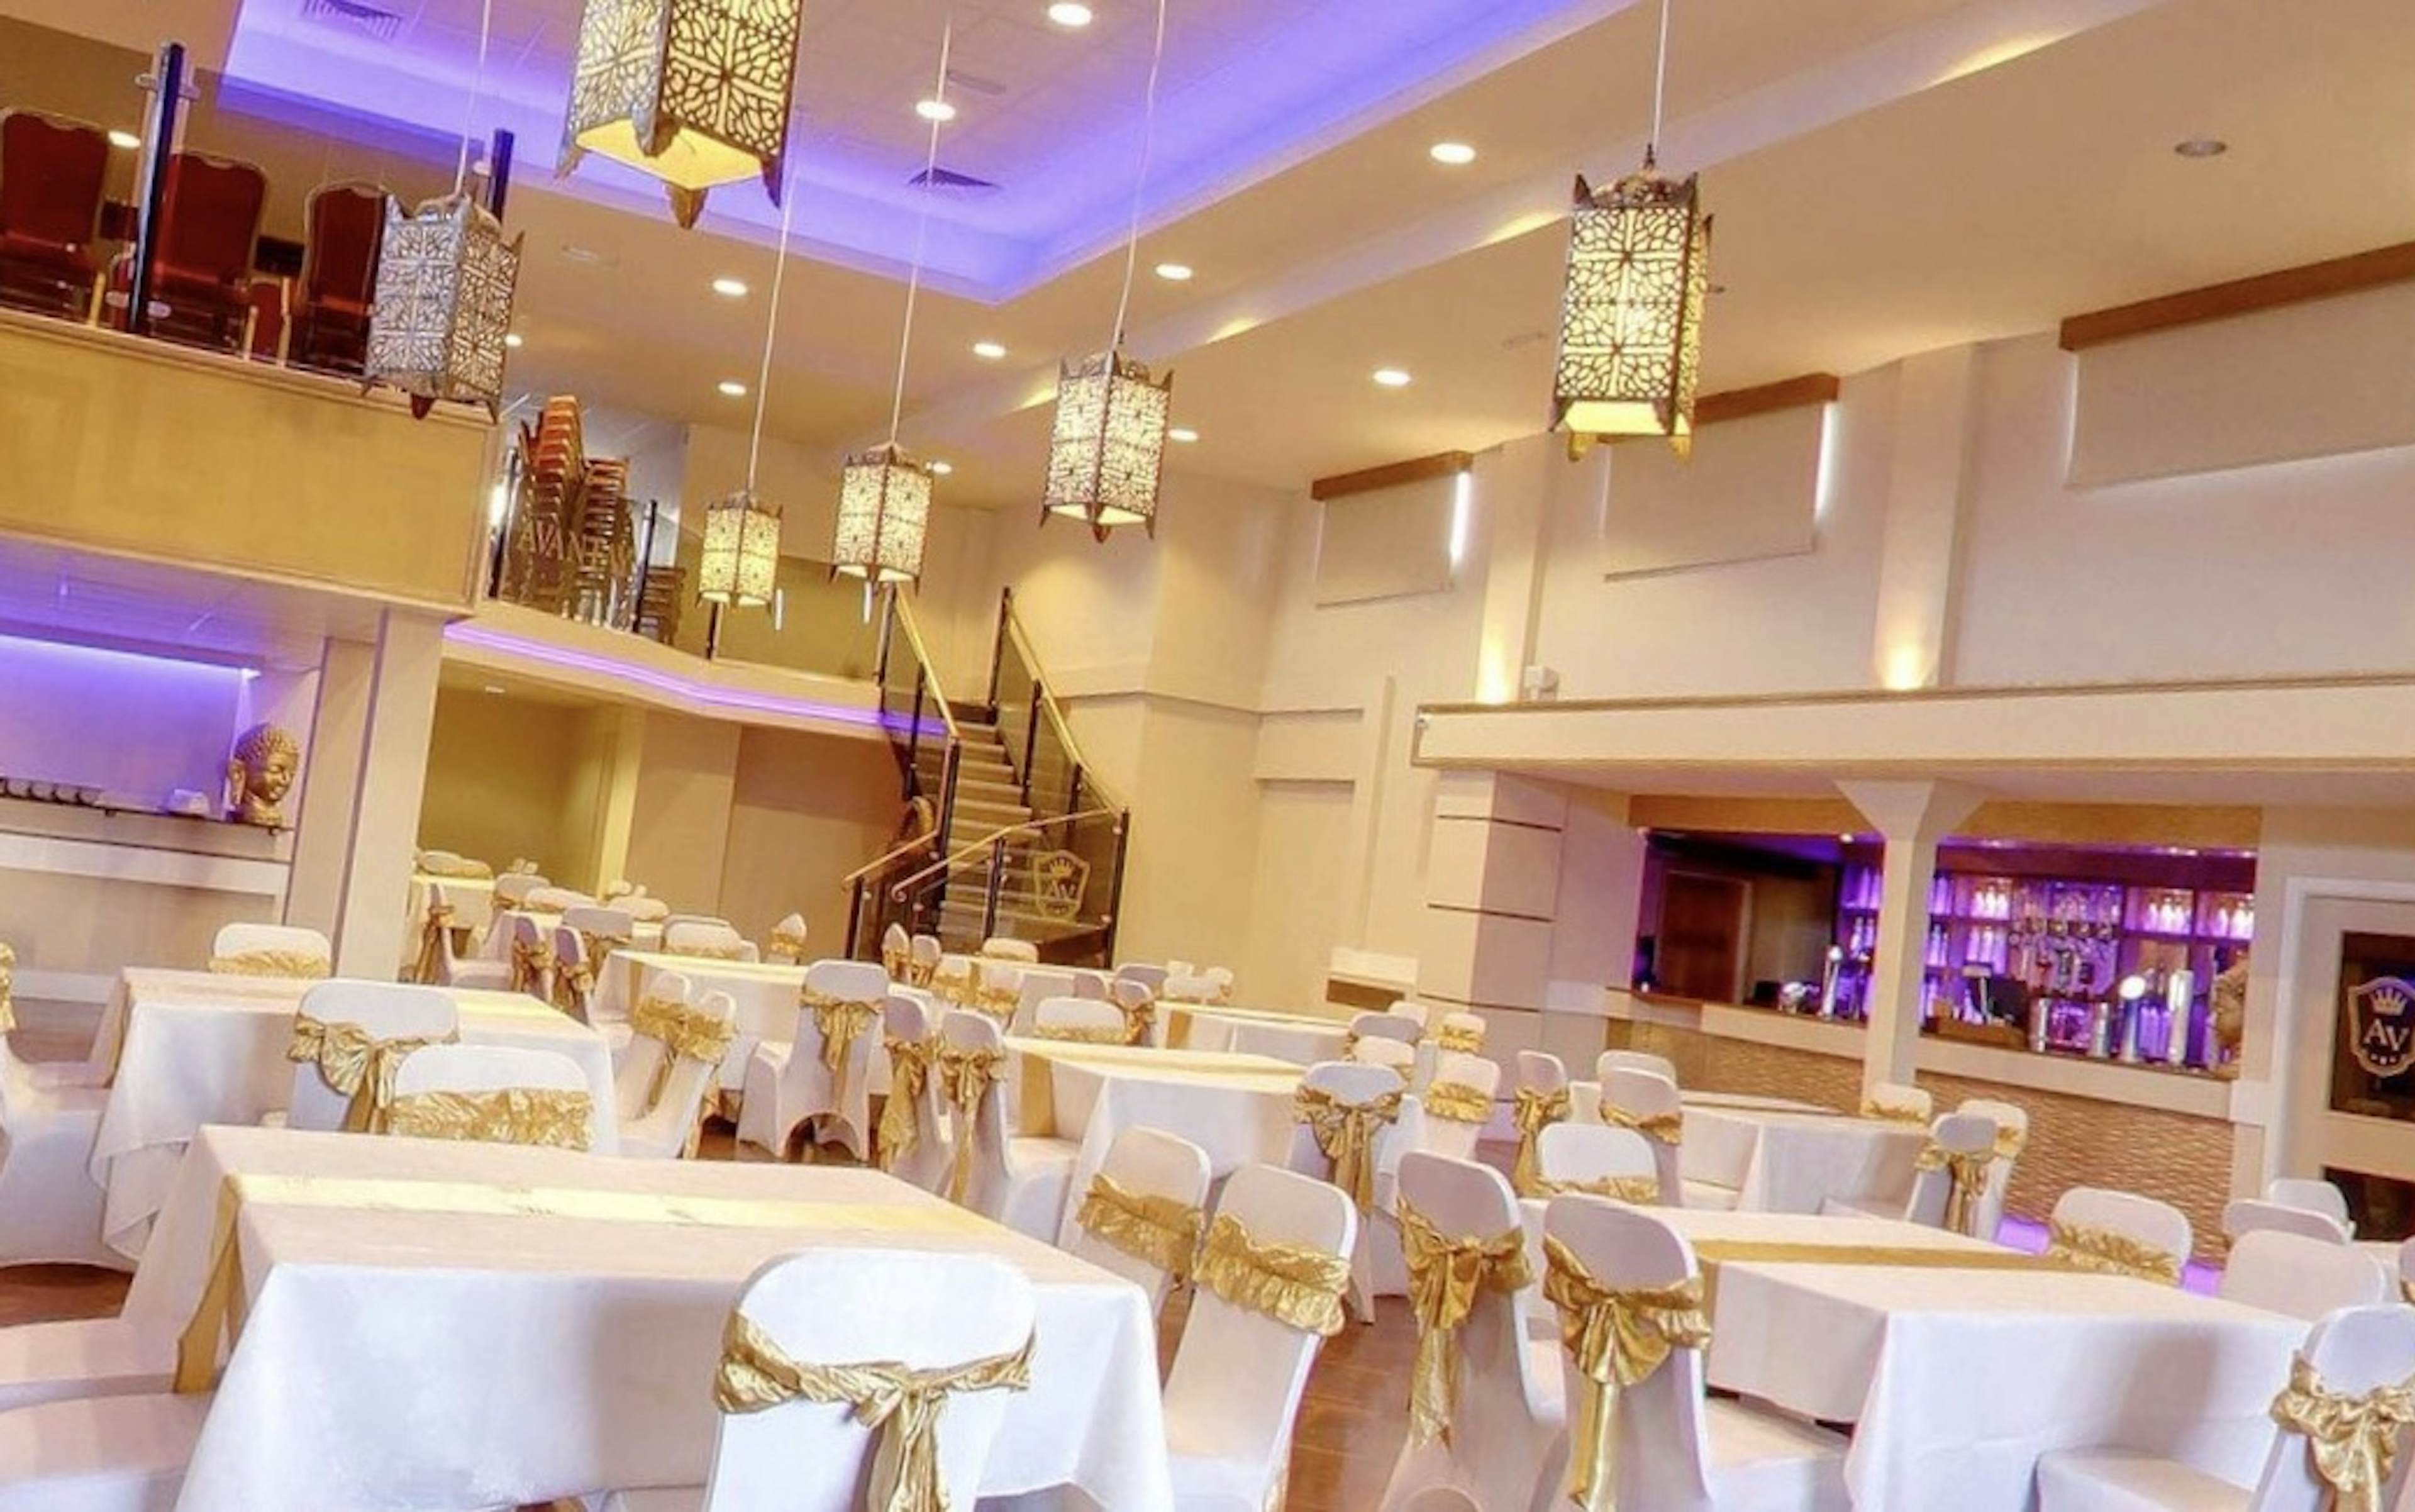 Avantay banqueting suite - Corporate image 1